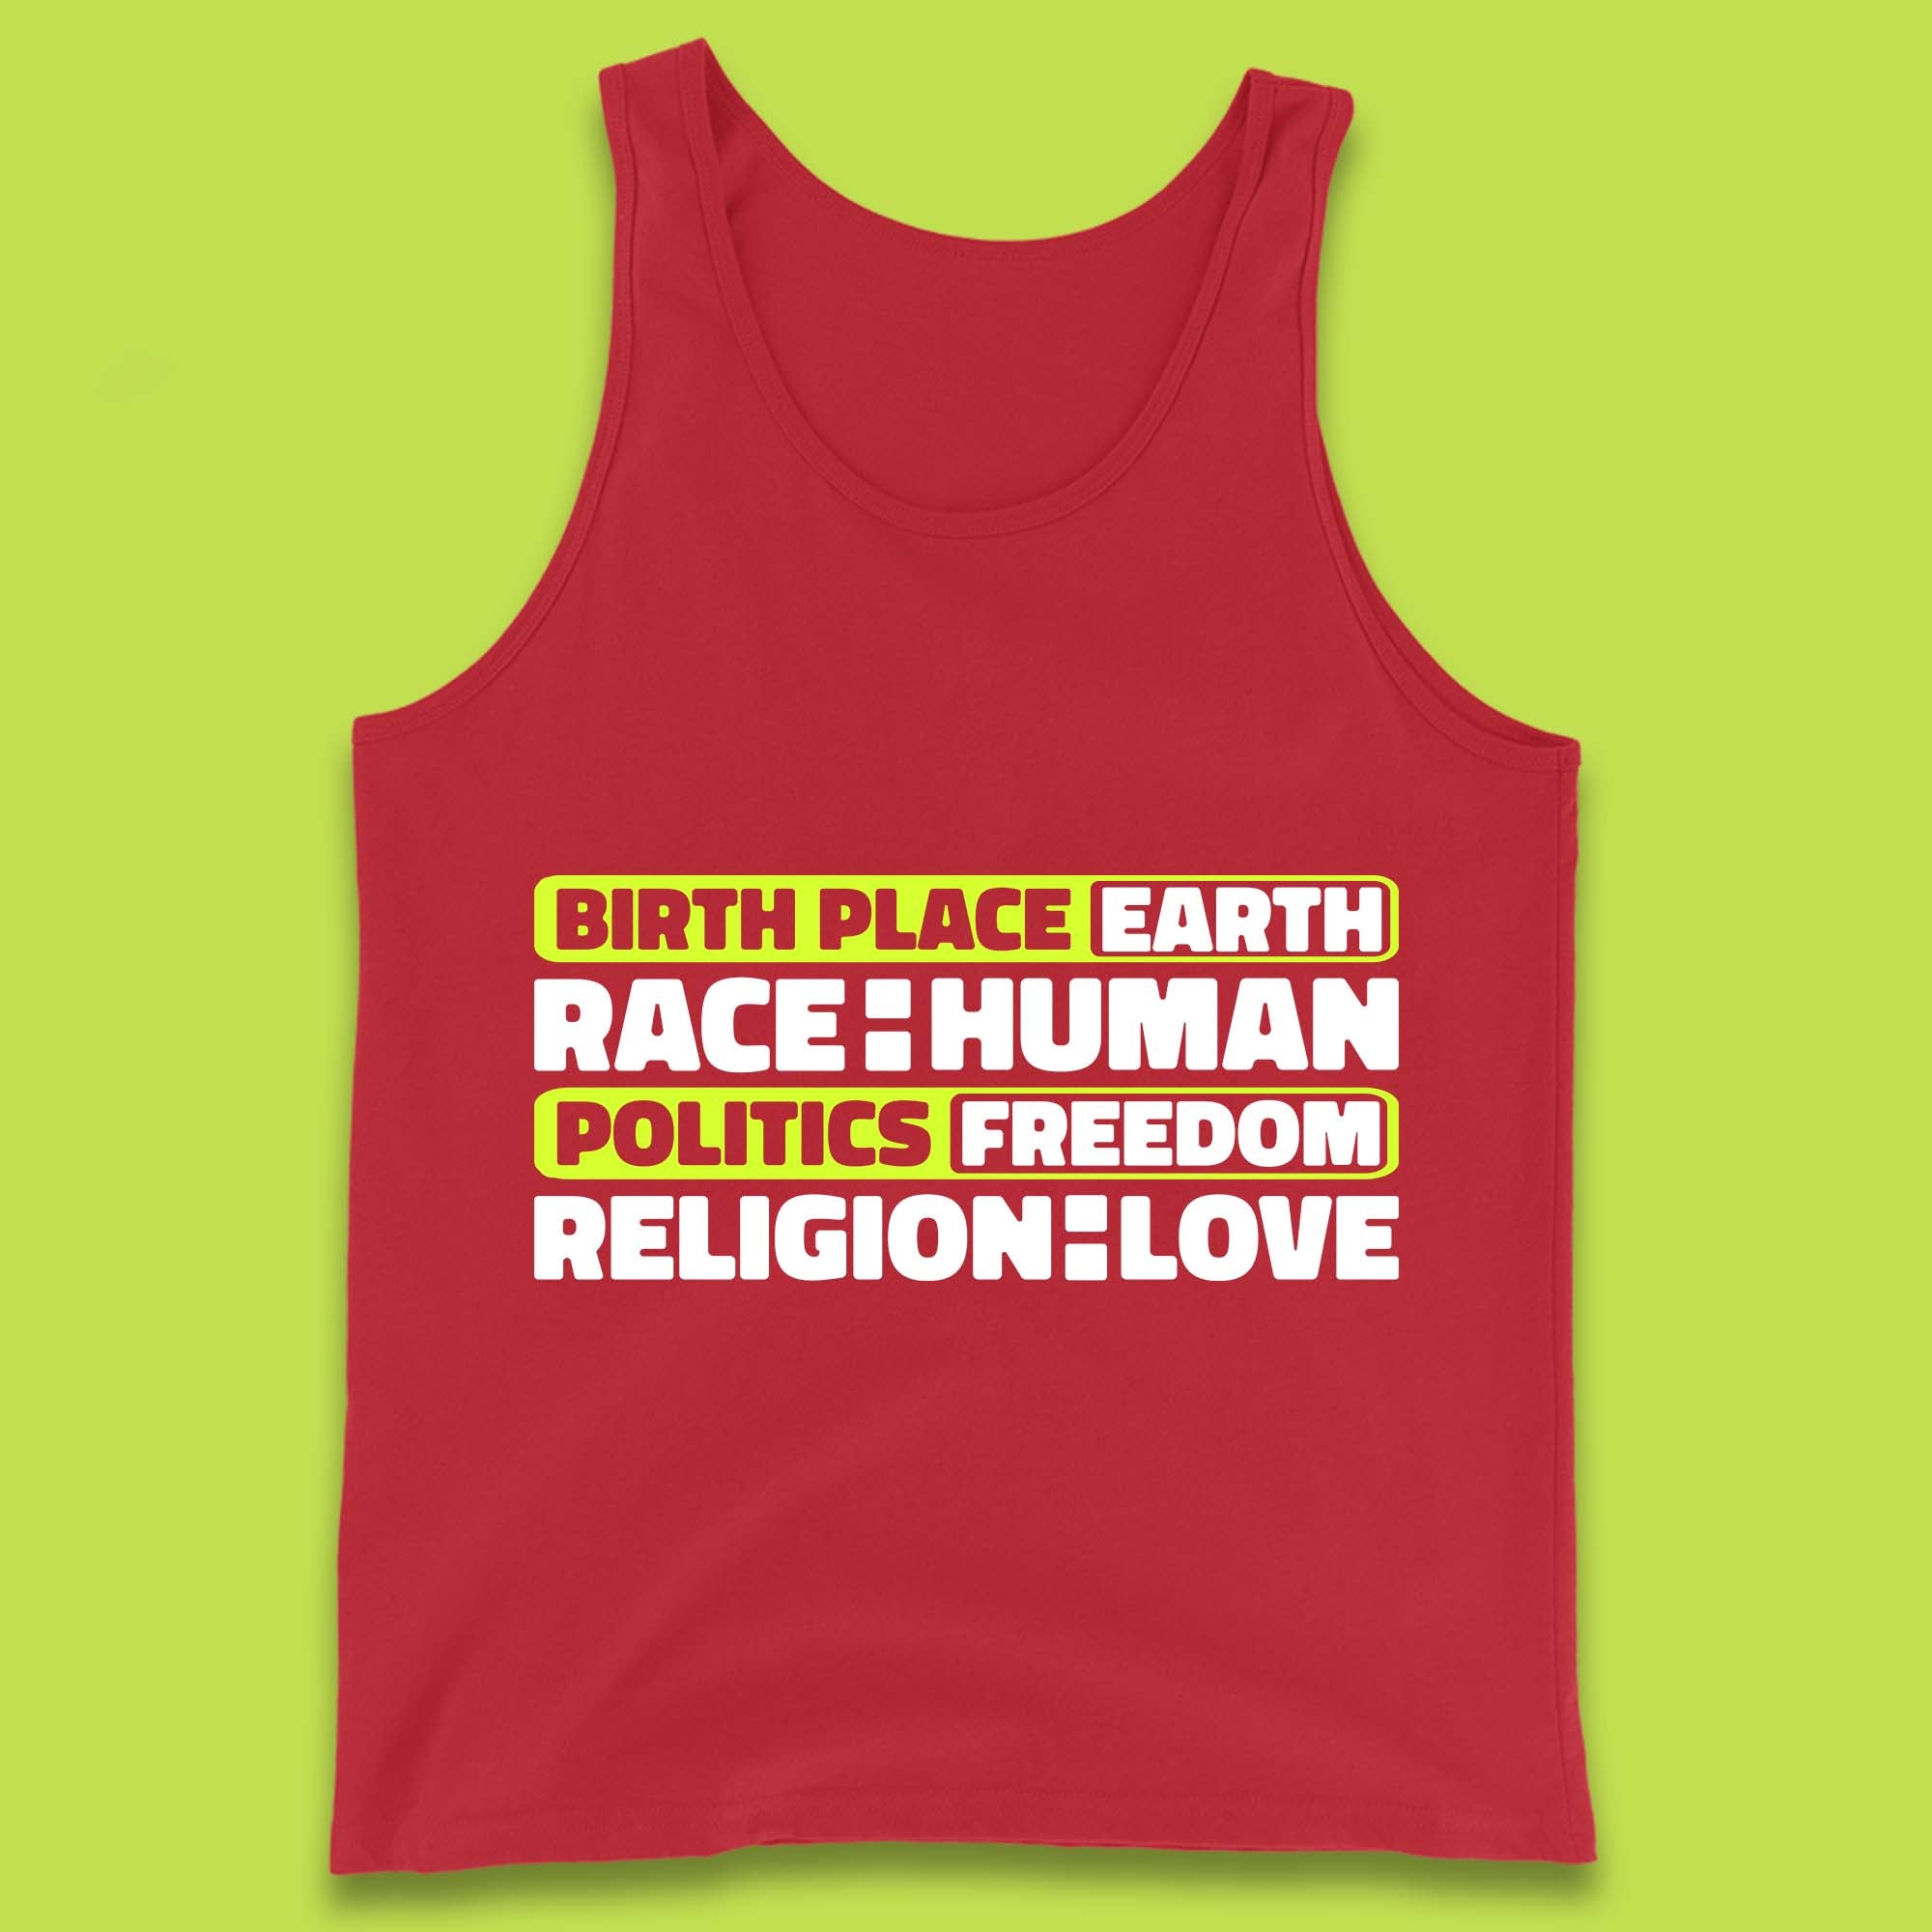 Birth Place Earth Race Human Politics Freedom Religion Love Human Rights Equality Tank Top